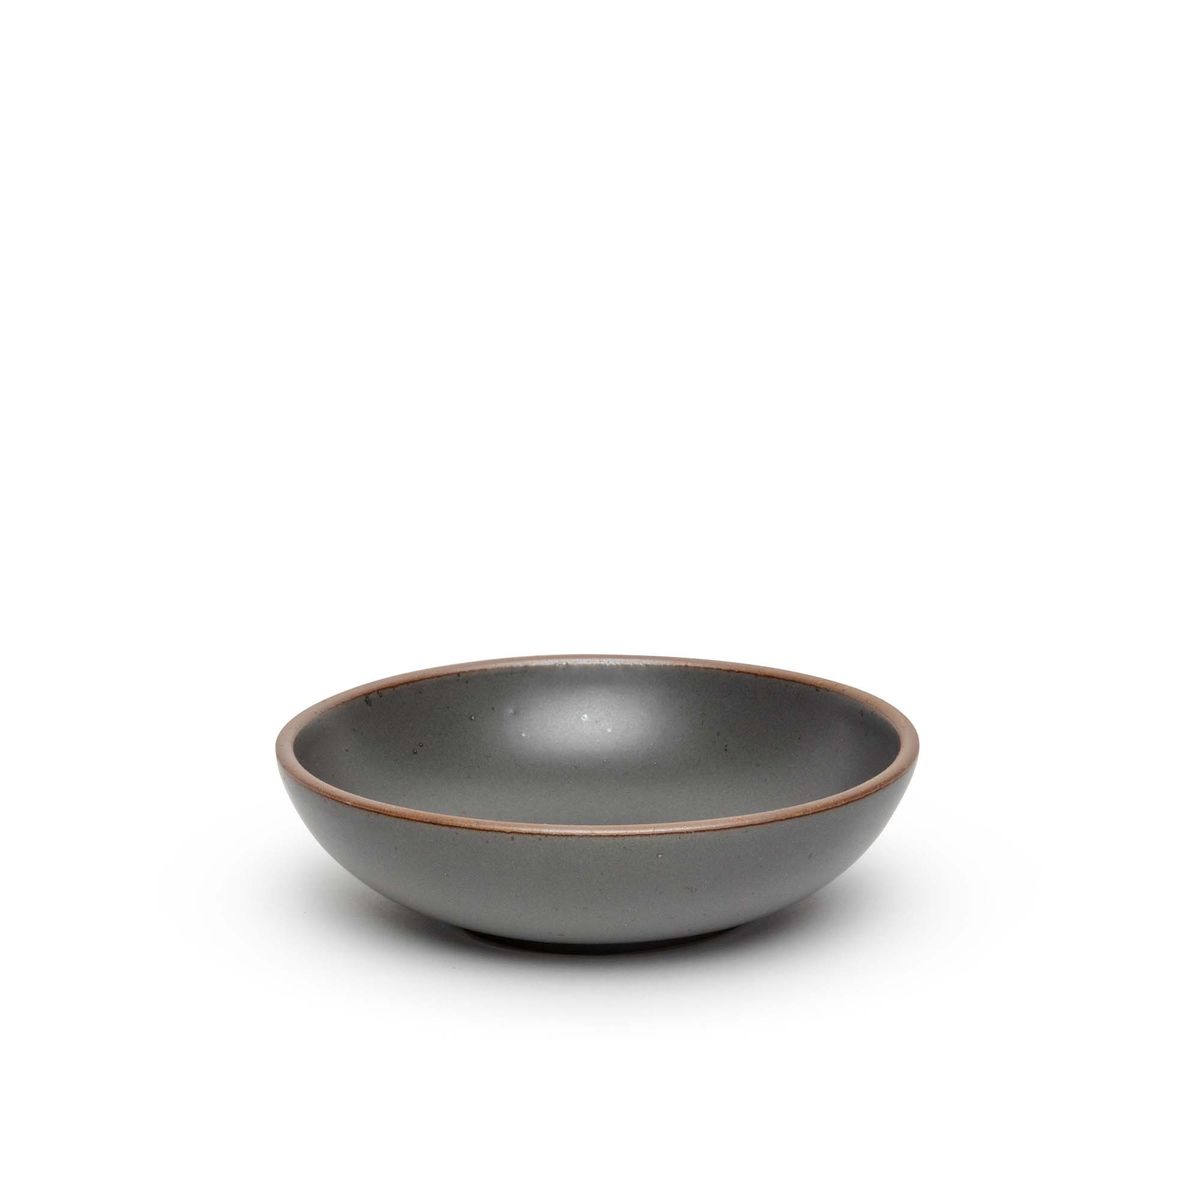 A dinner-sized shallow ceramic bowl in a cool, medium grey color featuring iron speckles and an unglazed rim